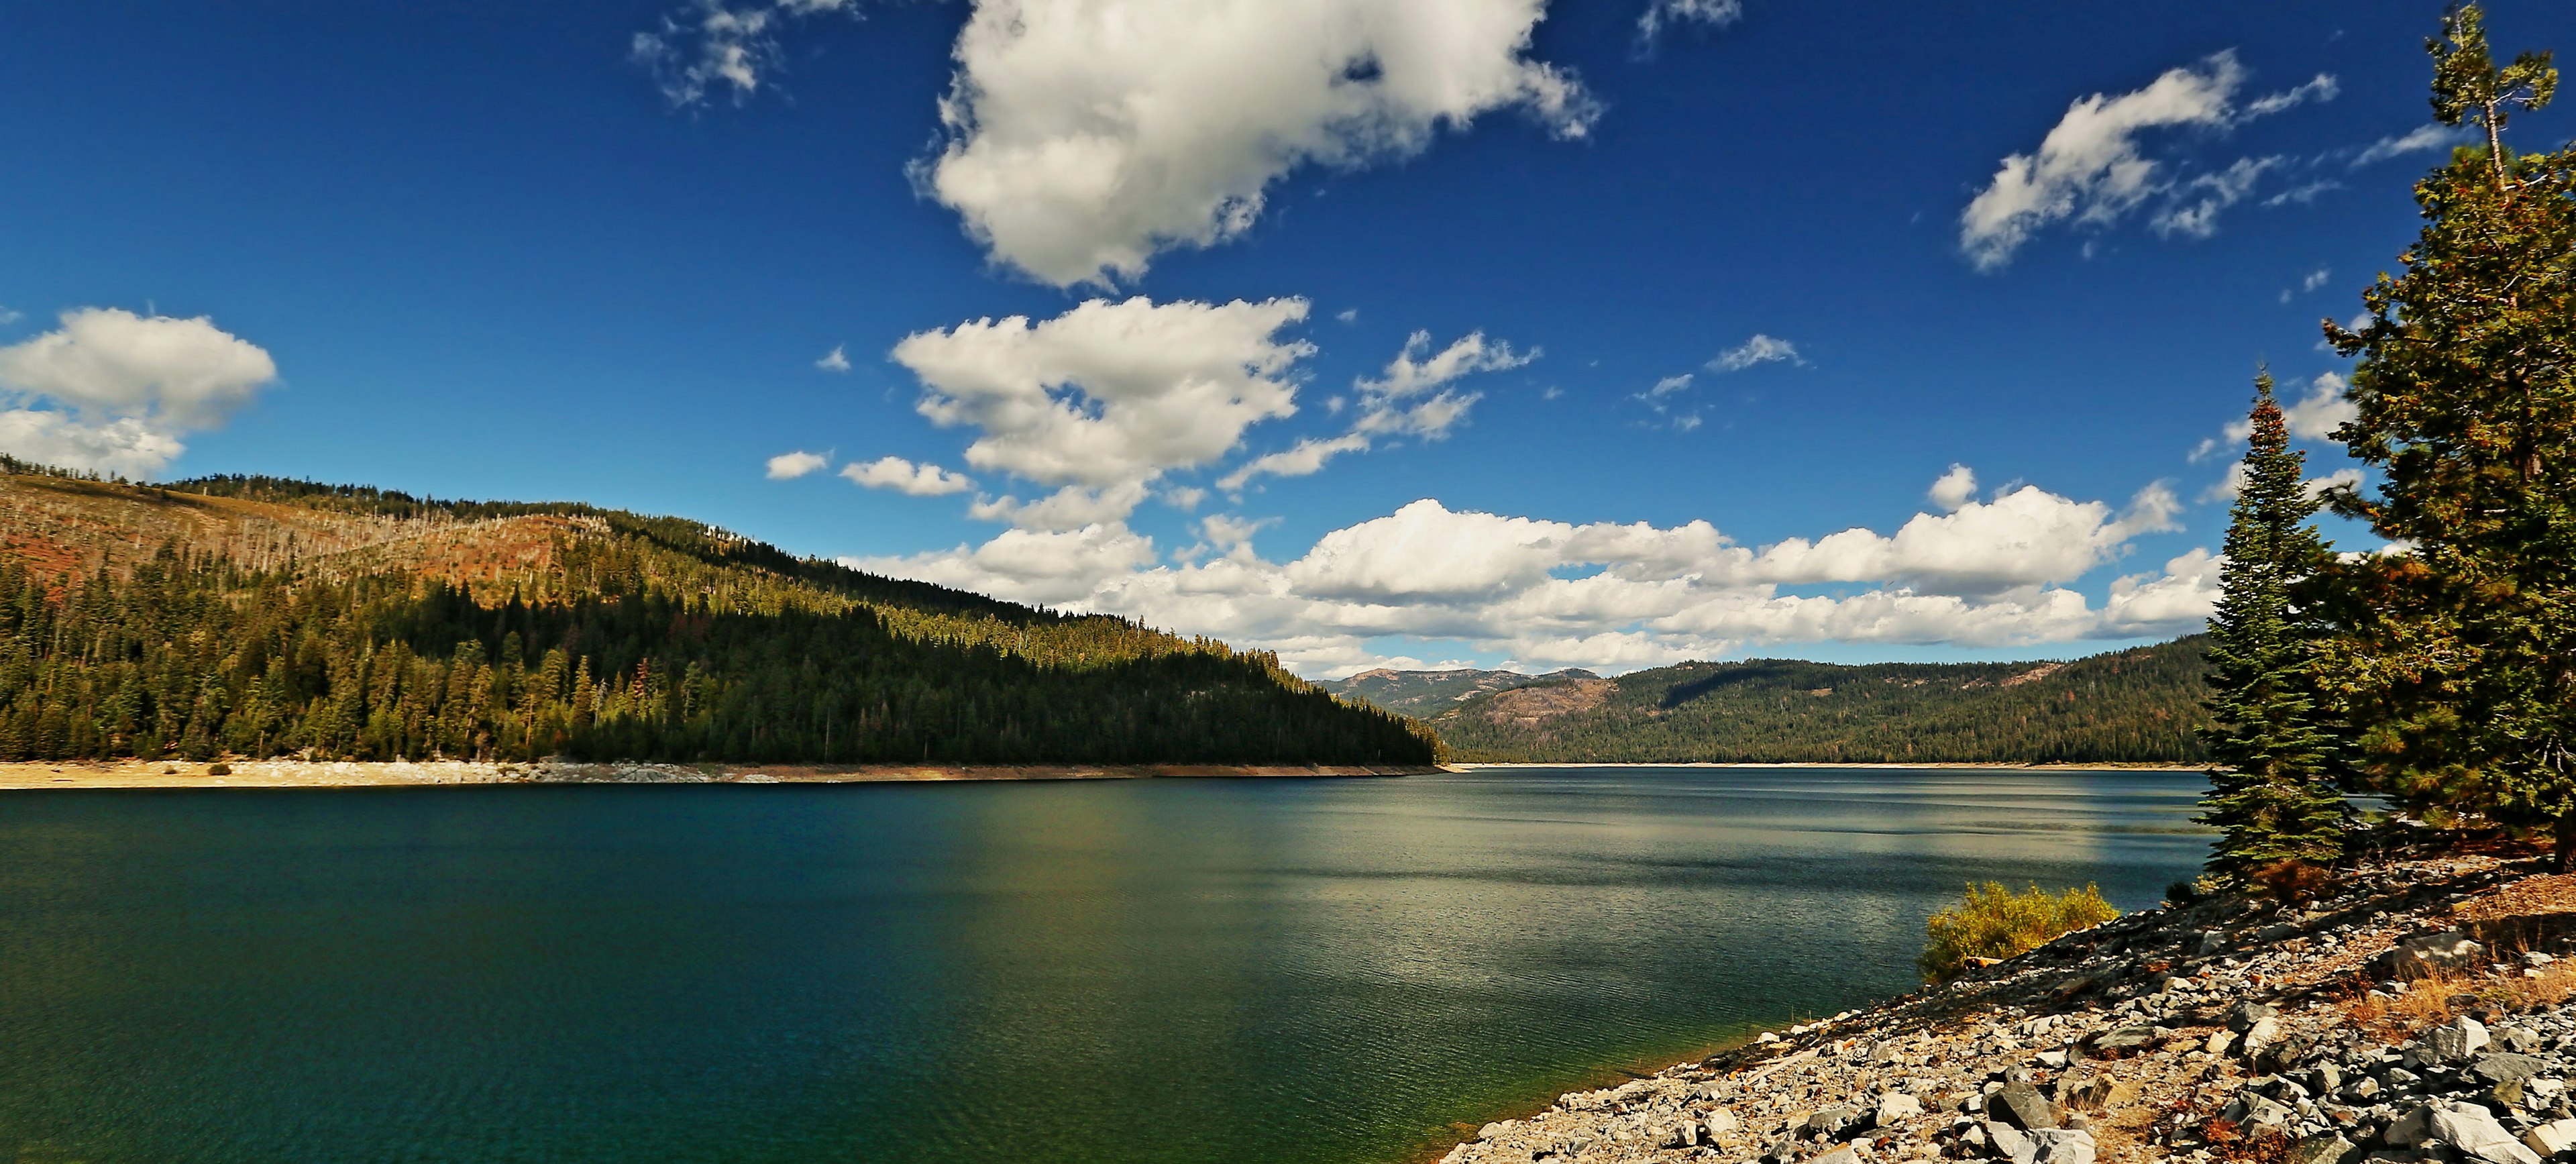 A photo of French Meadows Reservoir